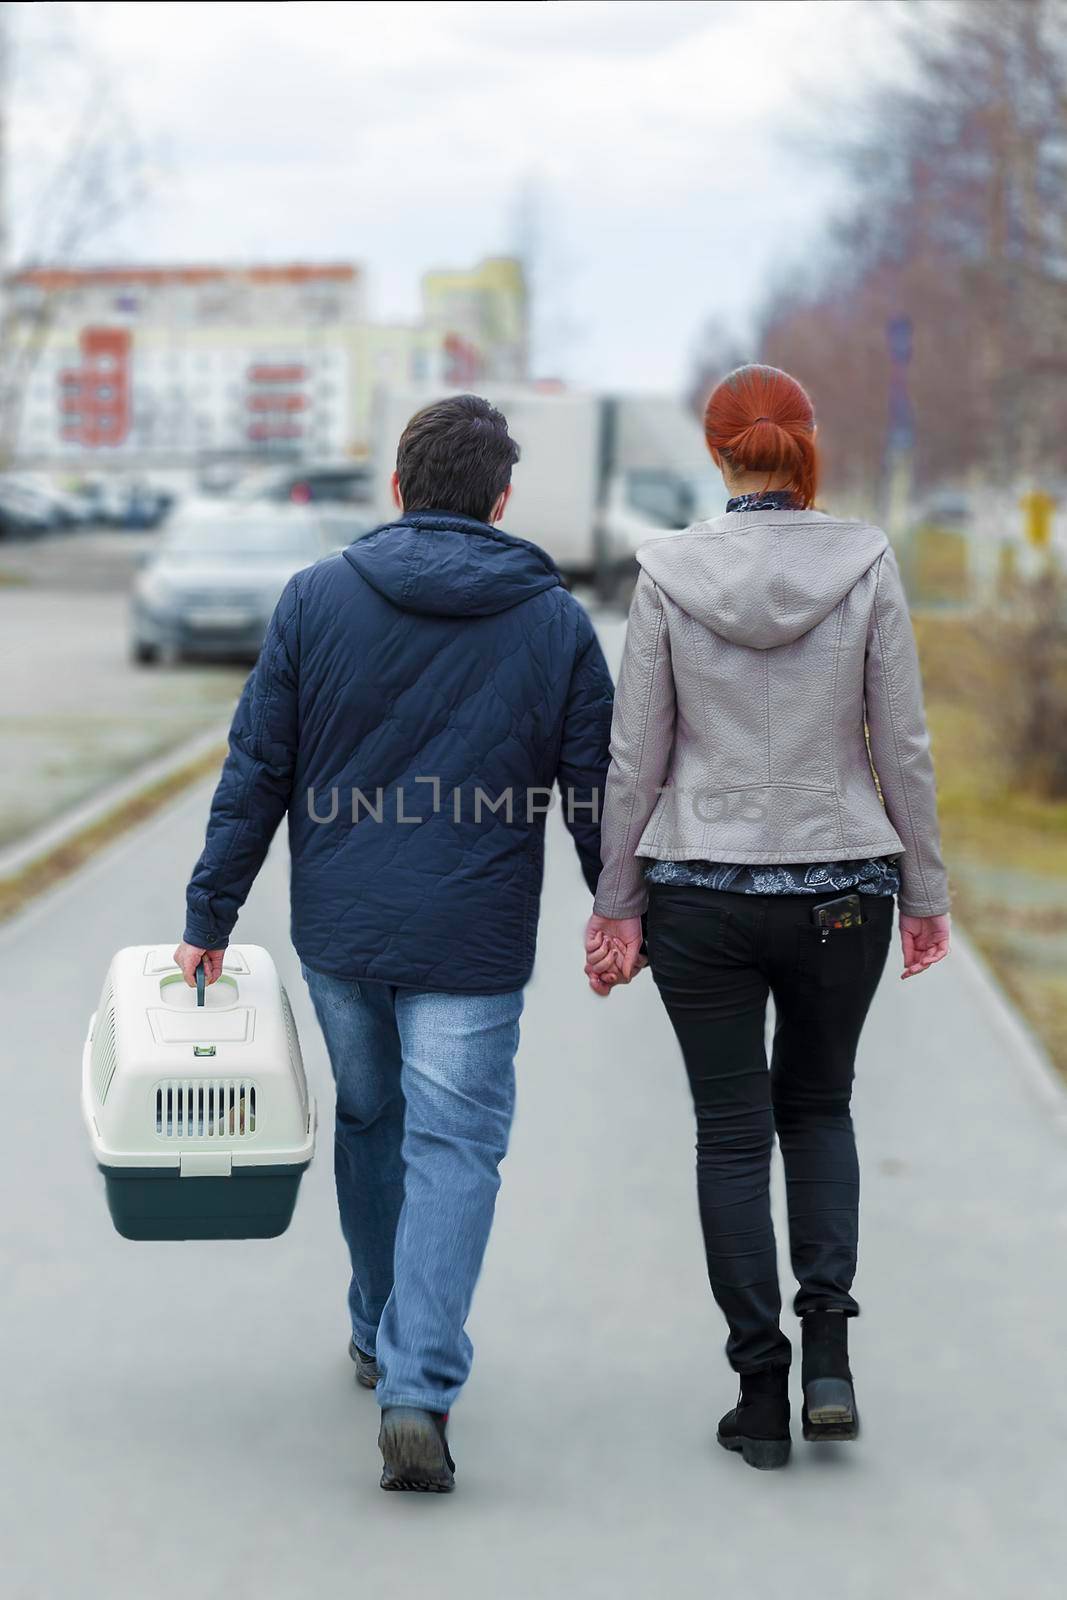 The couple walks and carries the animal in a cage. Surgut, Russia - 16 April 2021 by Essffes